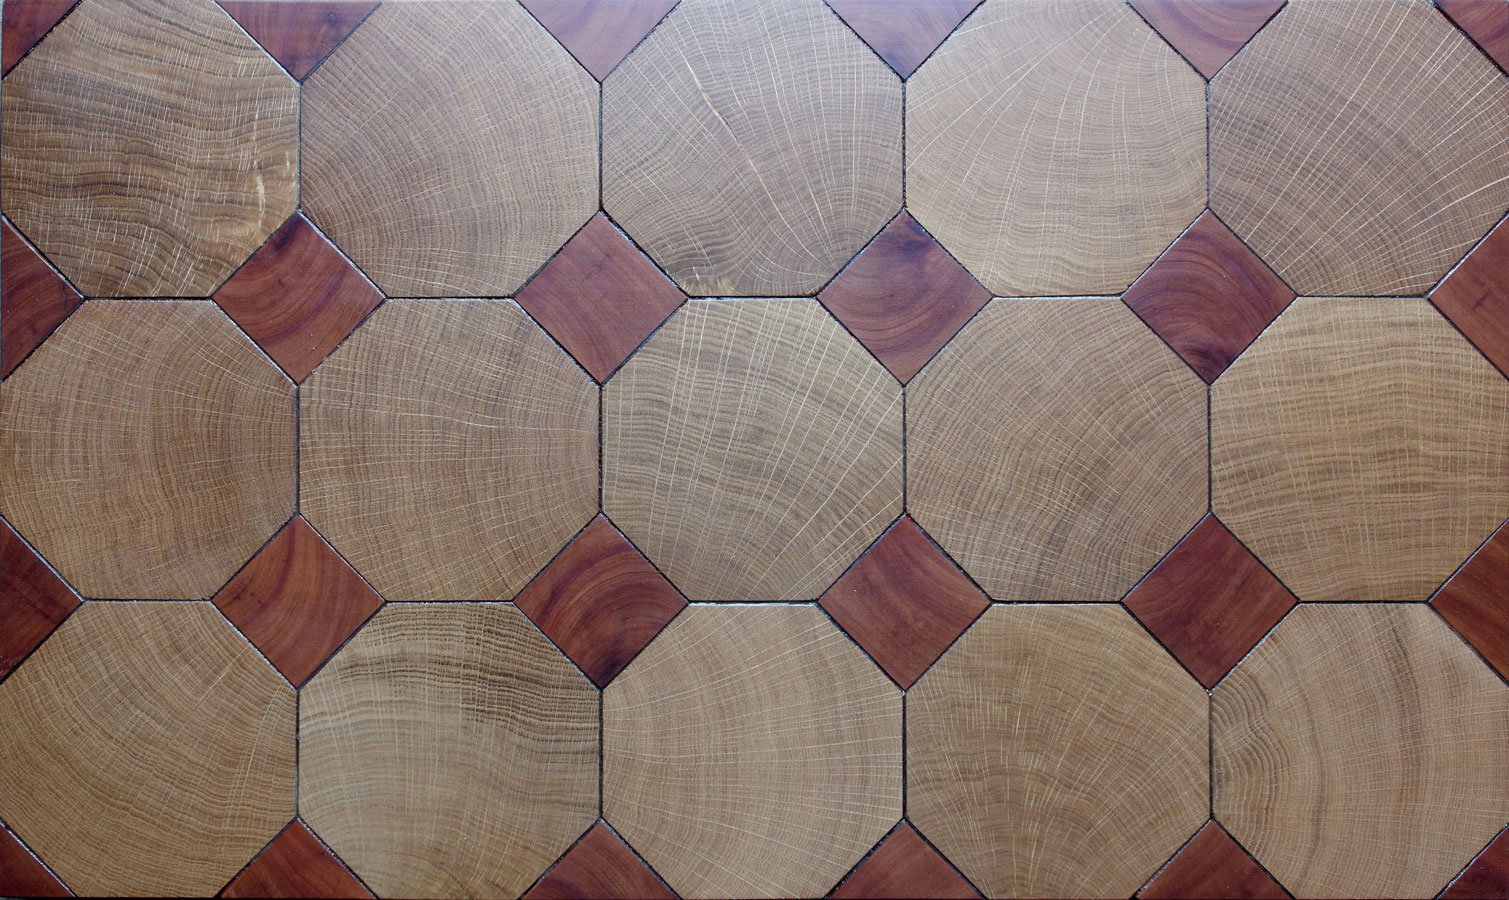 End grain Octagonal parquet floor in oak with cabochons in red wood